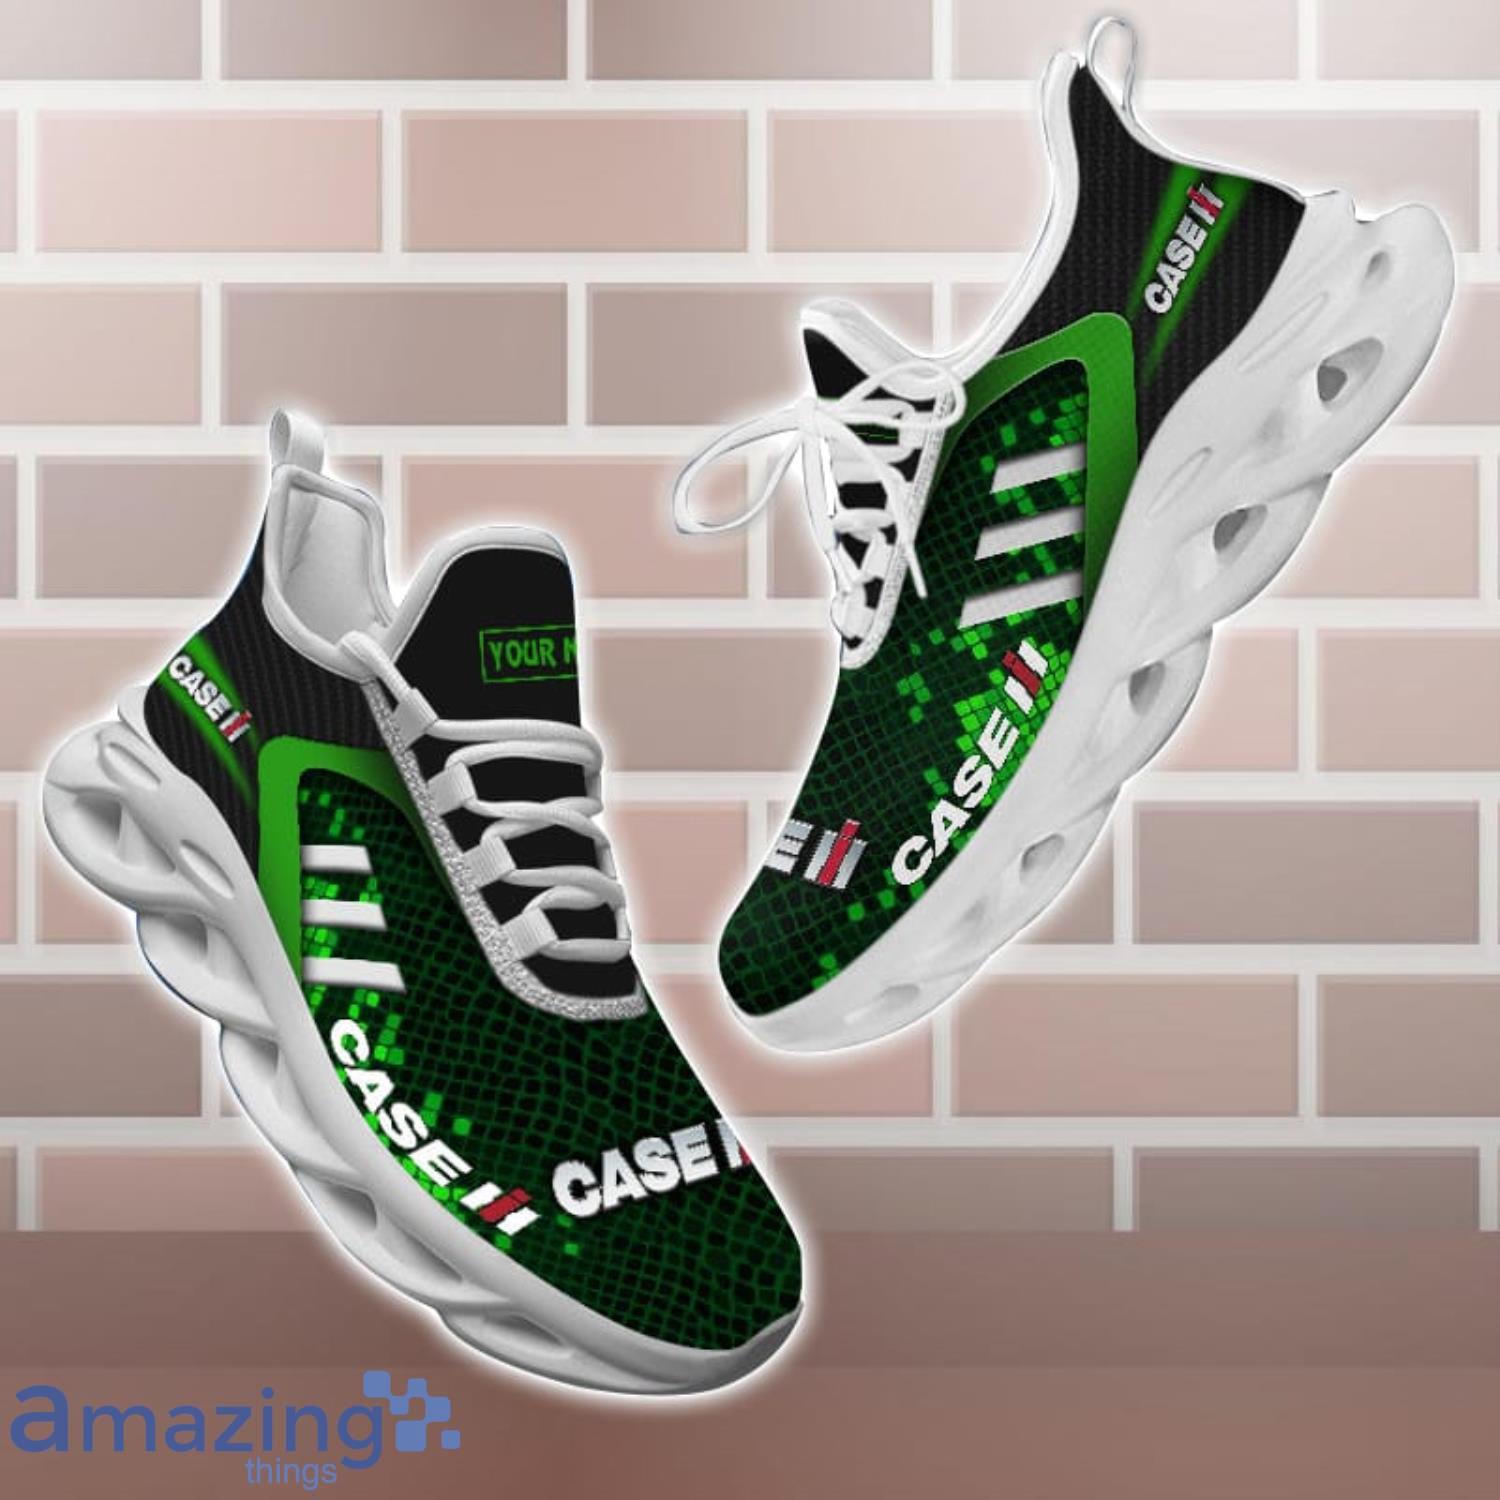 Case IH Shoes Green Square Pattern Custom Name Max Soul Sneakers For Men Women Product Photo 1